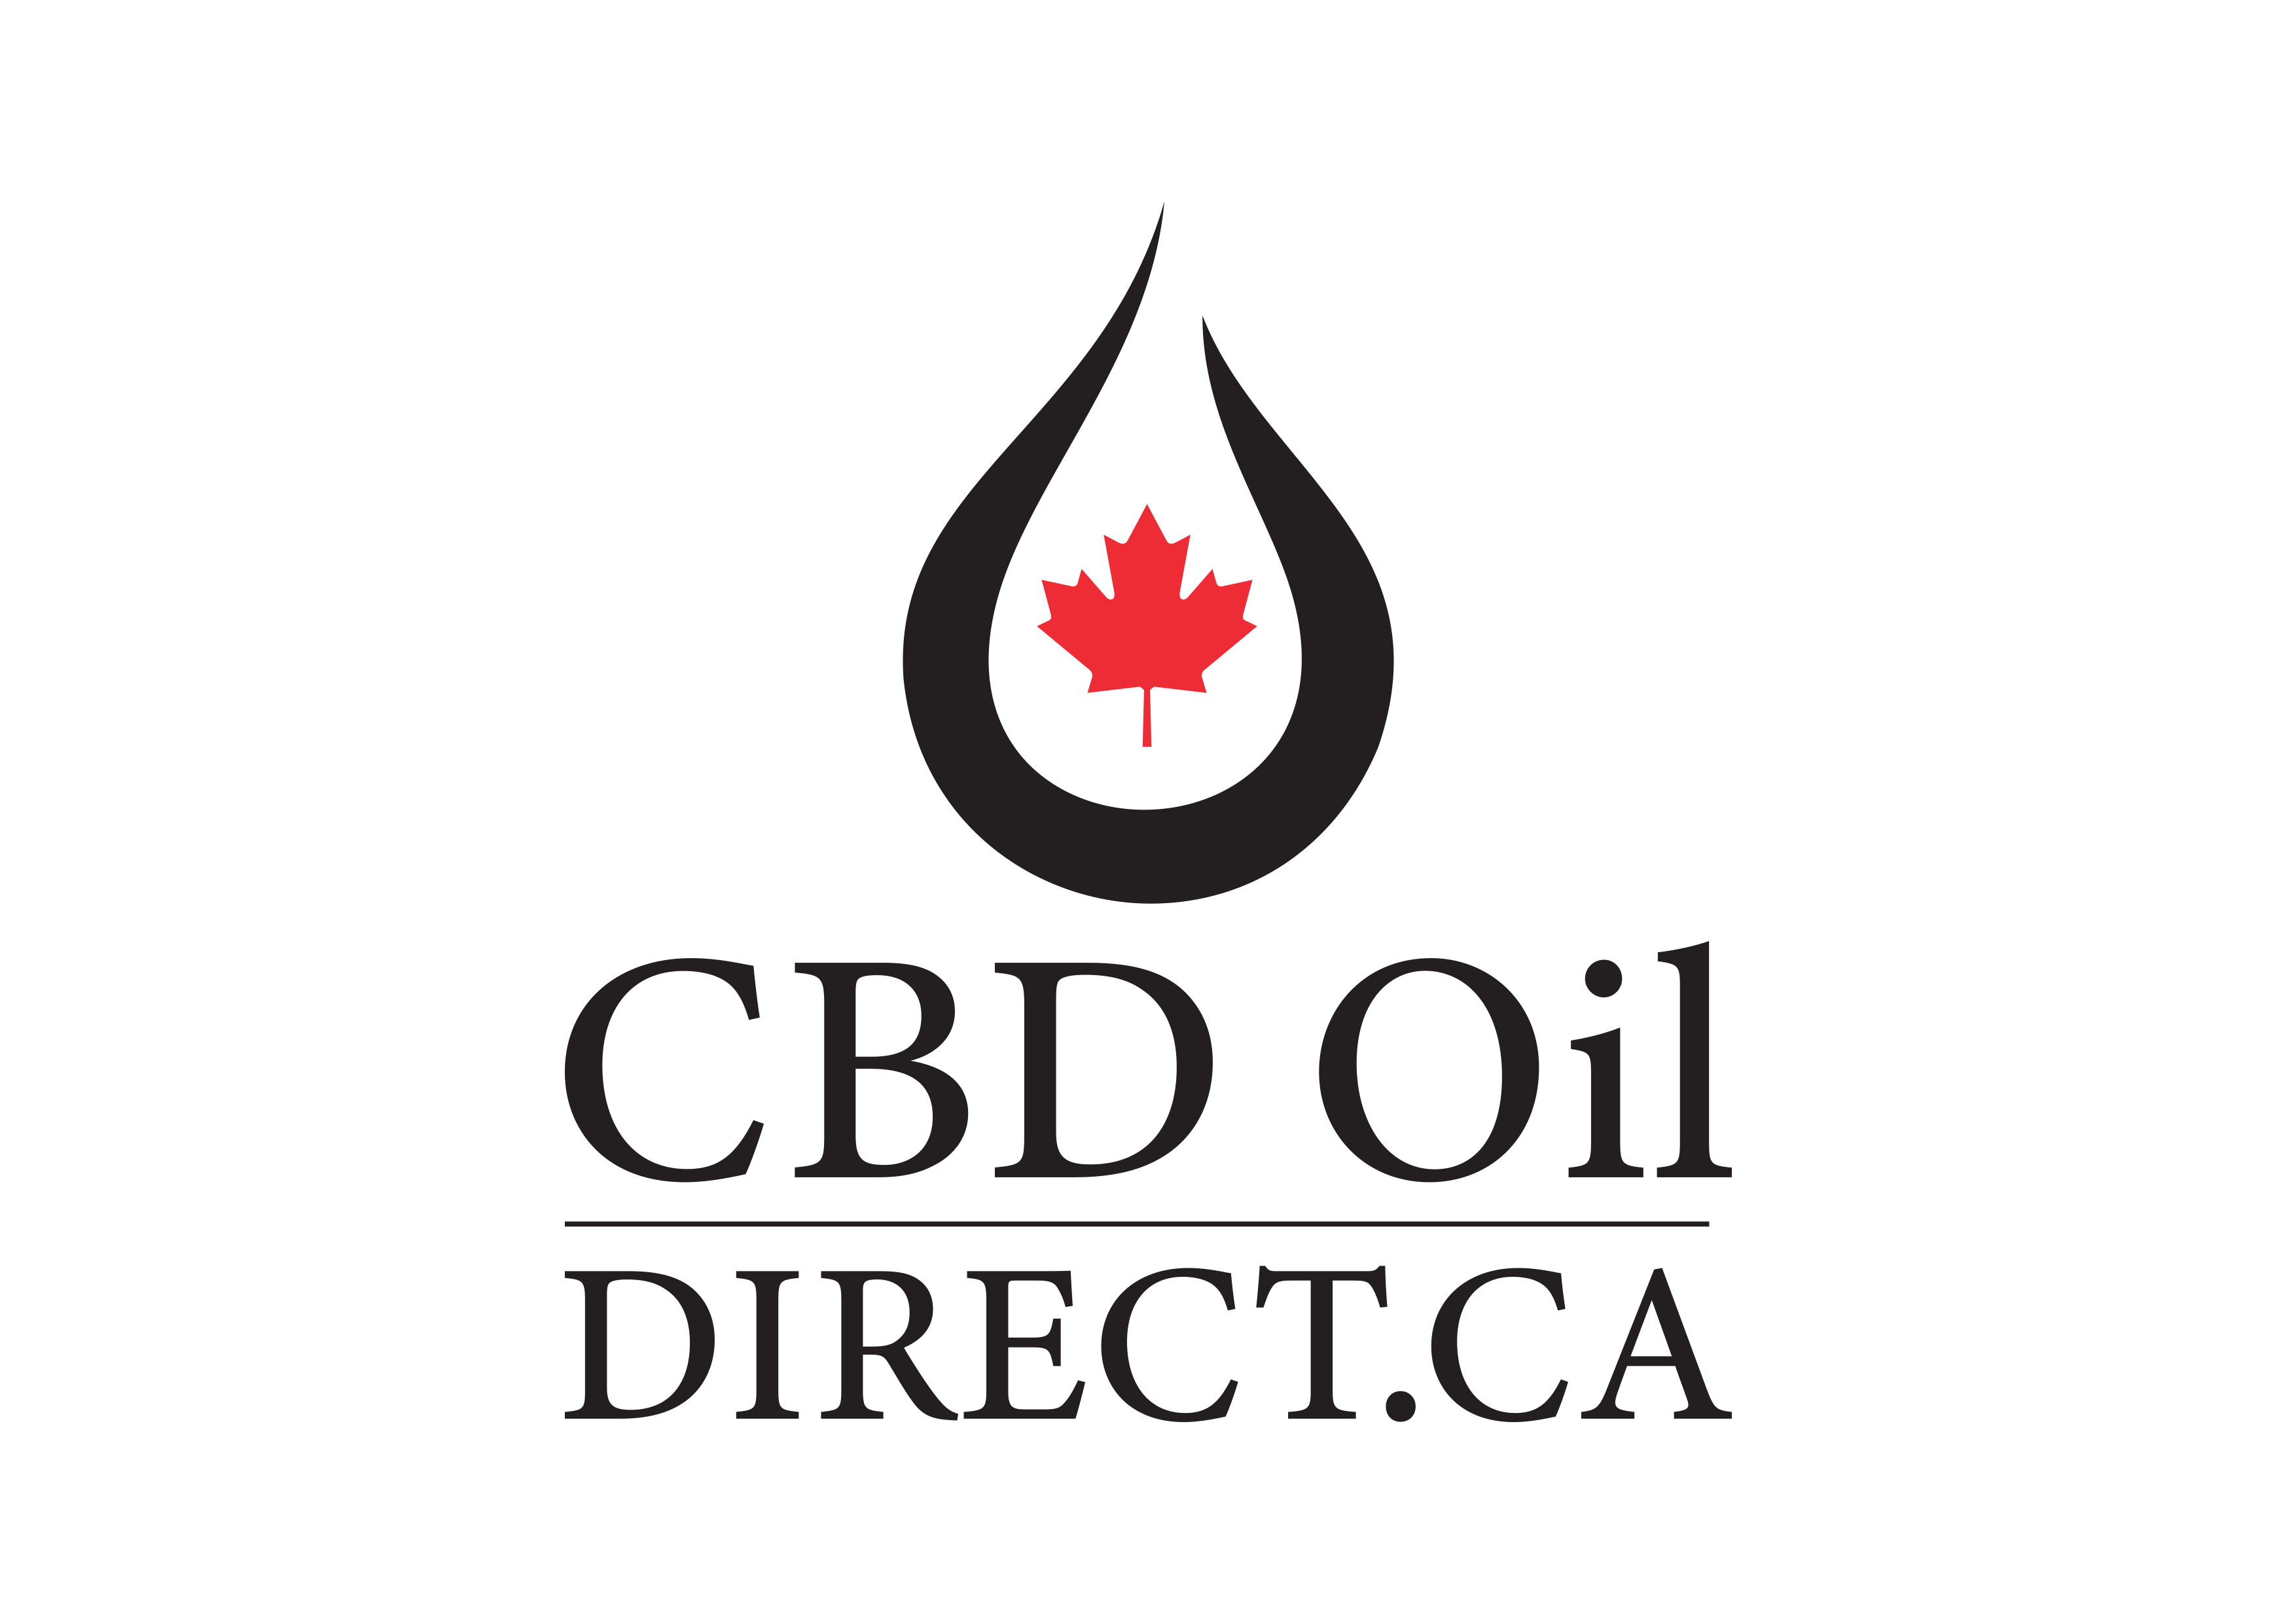 educational: the ultimate brand to find cbd oil near me